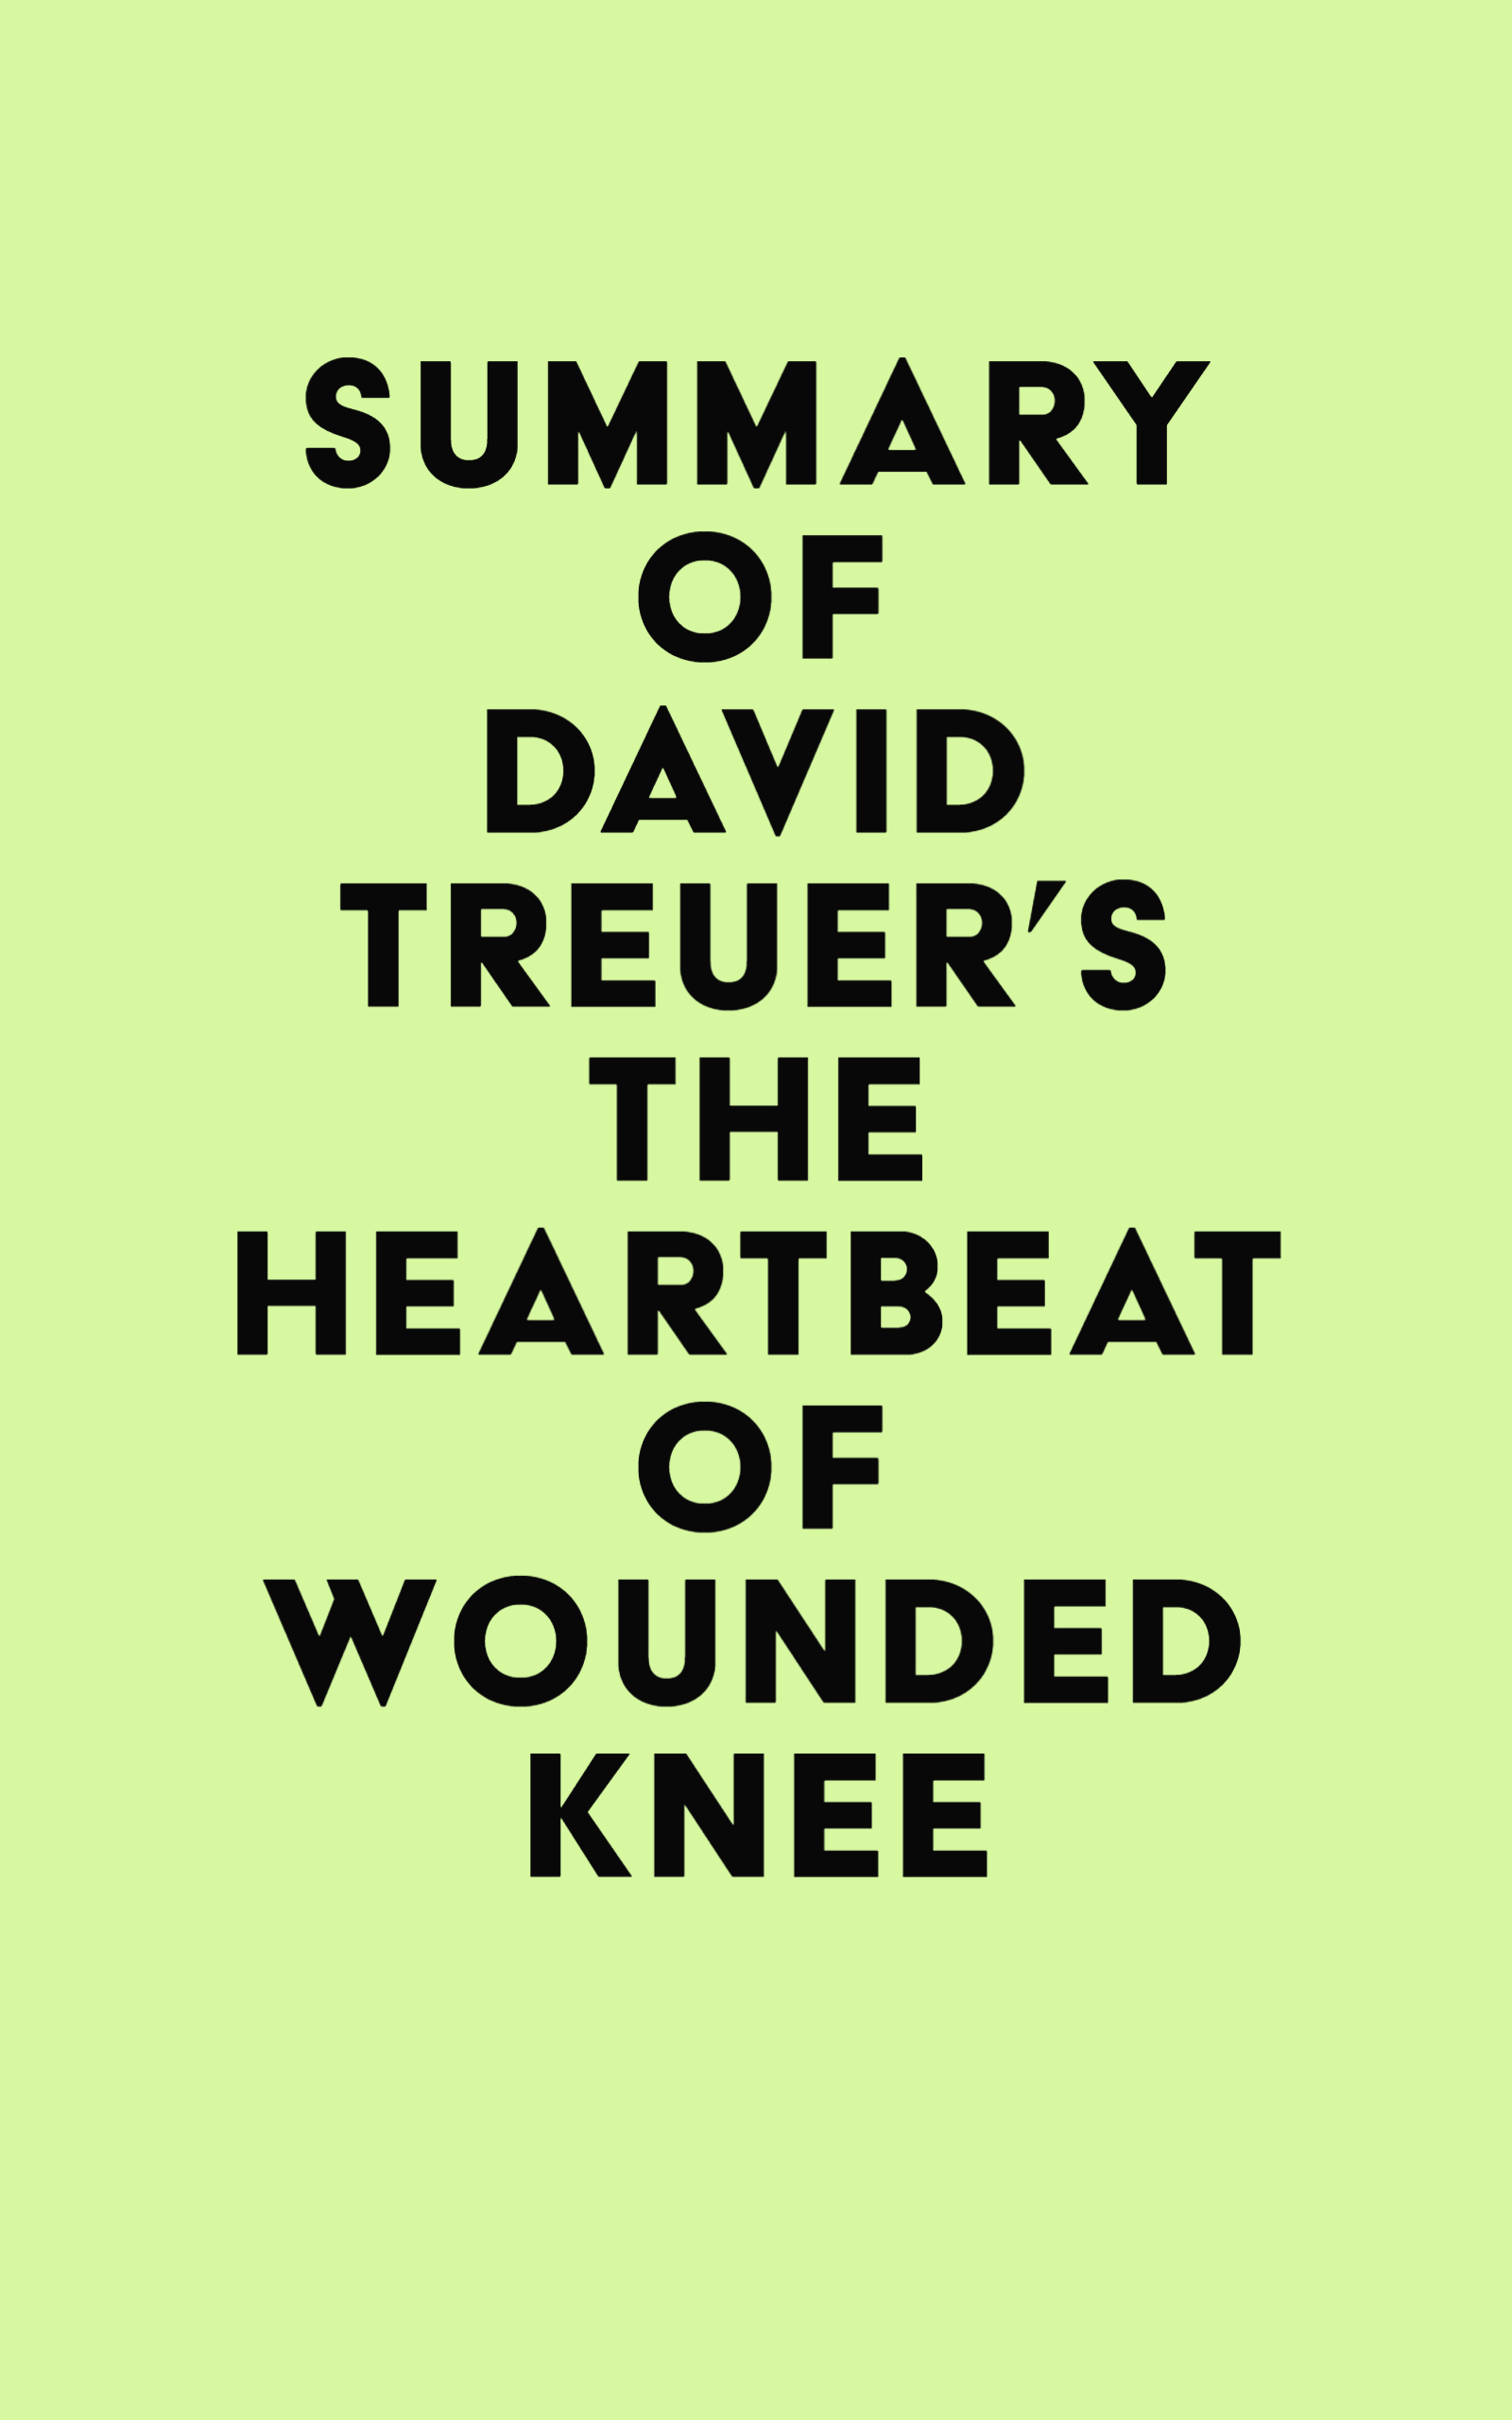 Summary of David Treuer's The Heartbeat of Wounded Knee